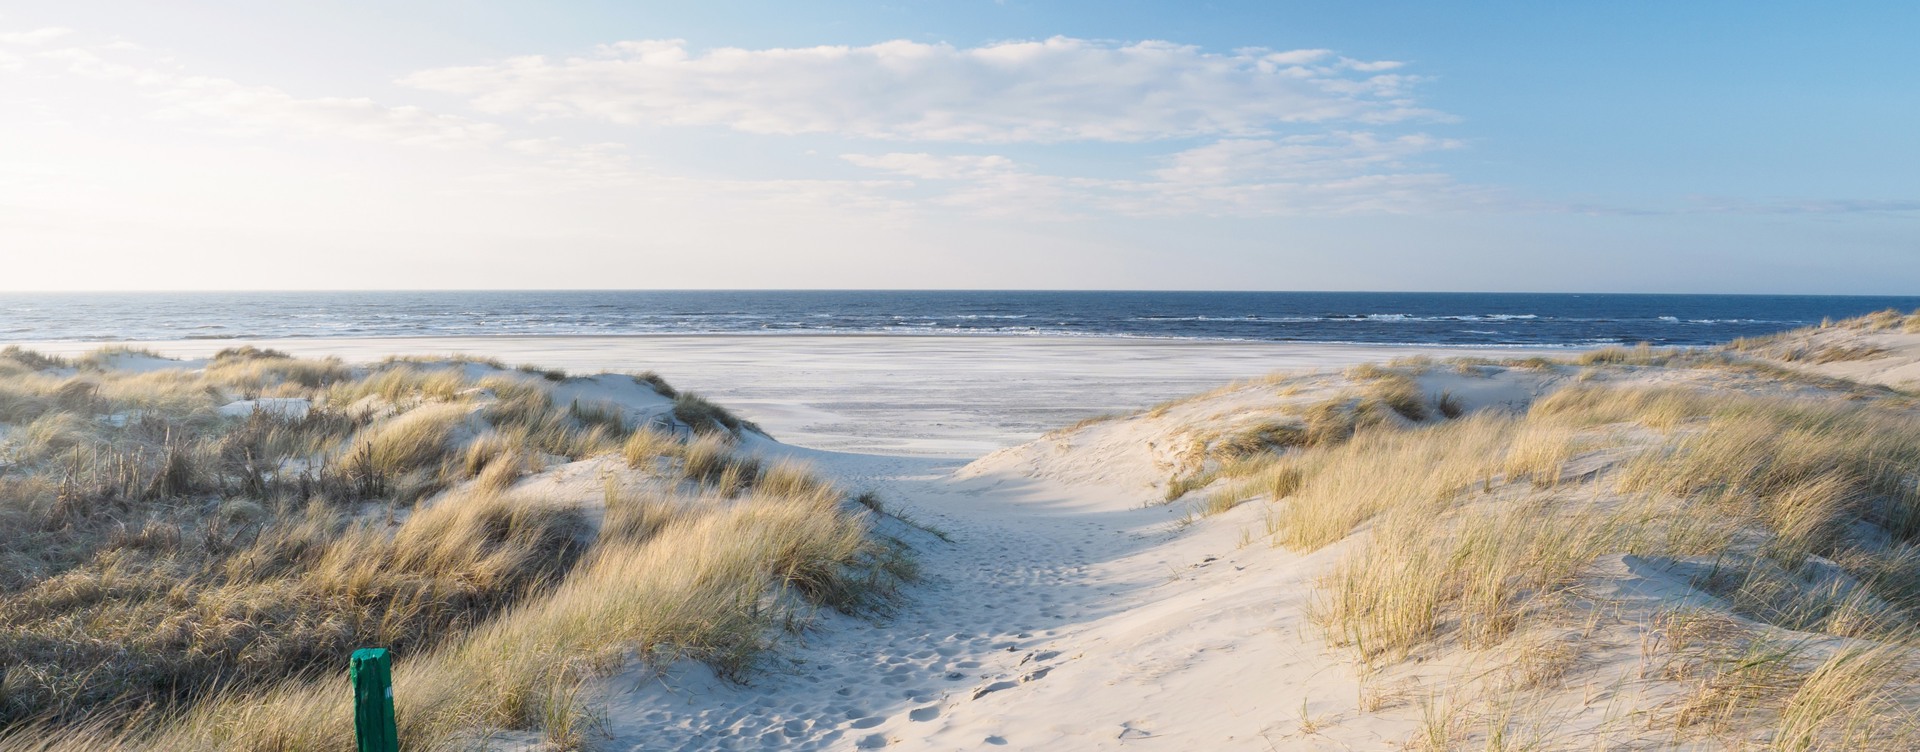 Experience a wonderful holiday in Zeeland
in beautiful surroundings